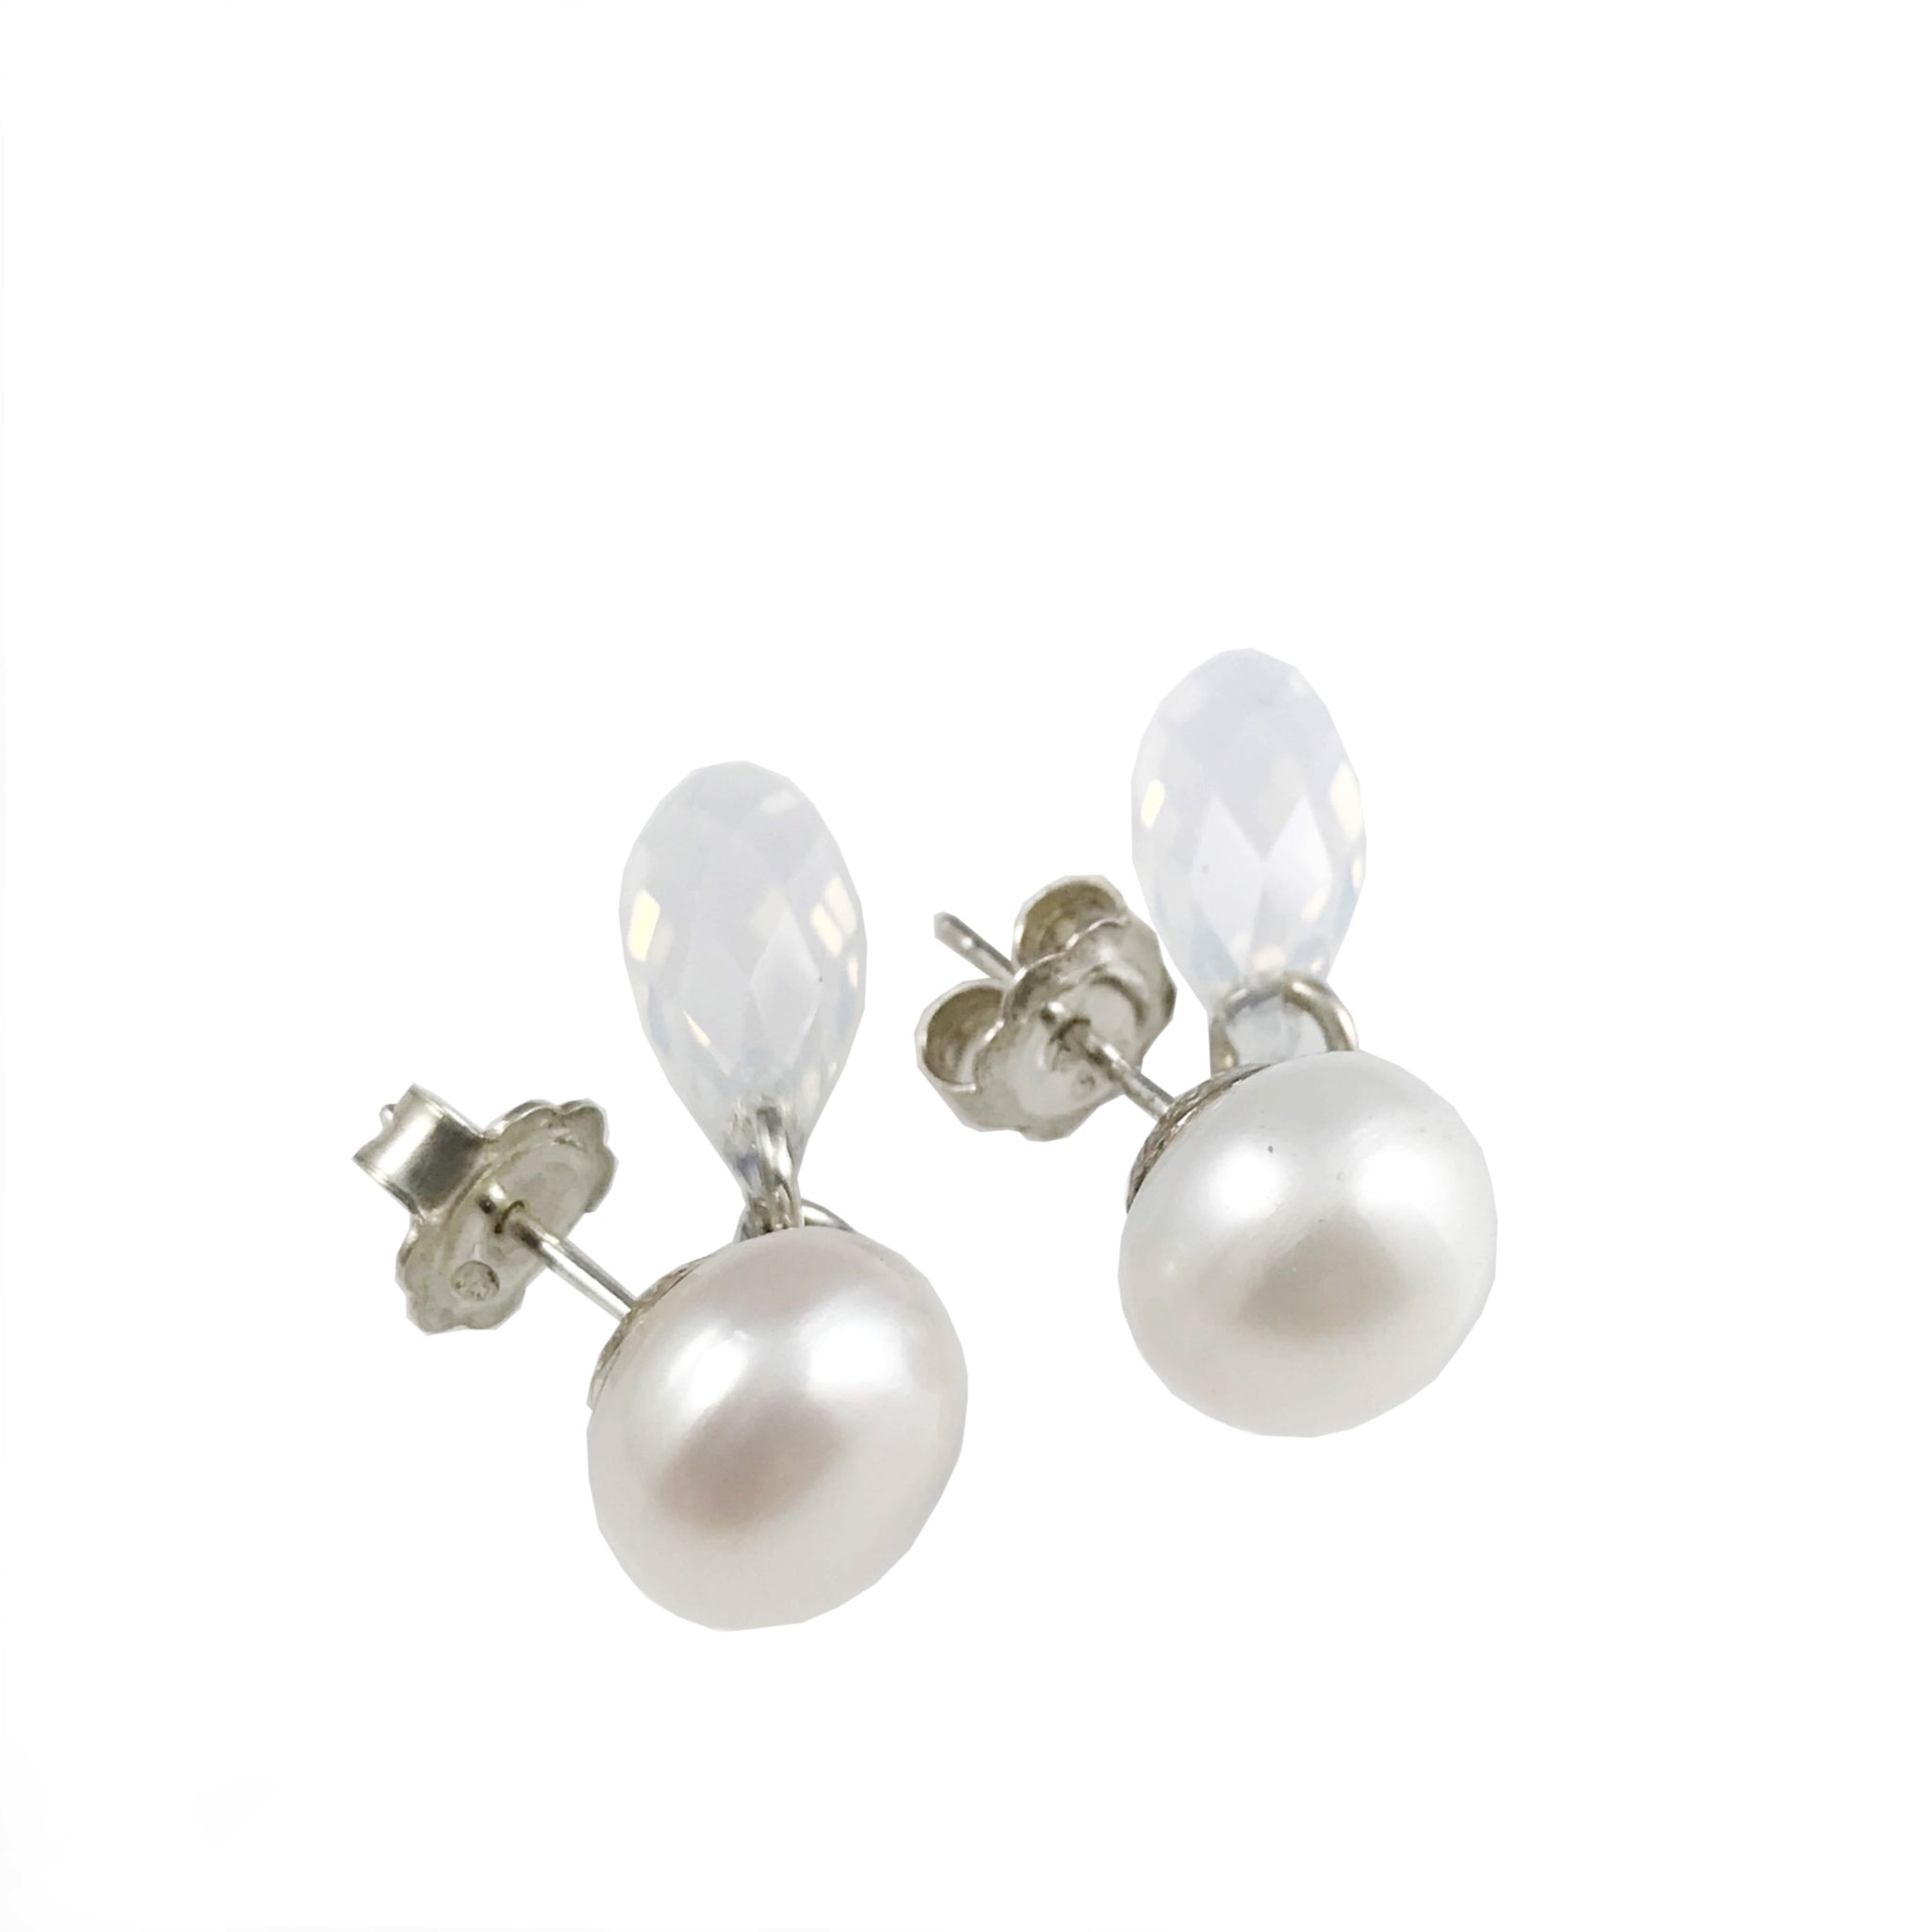 'Pearl Wonder' - Round pearl earrings with cystral drops